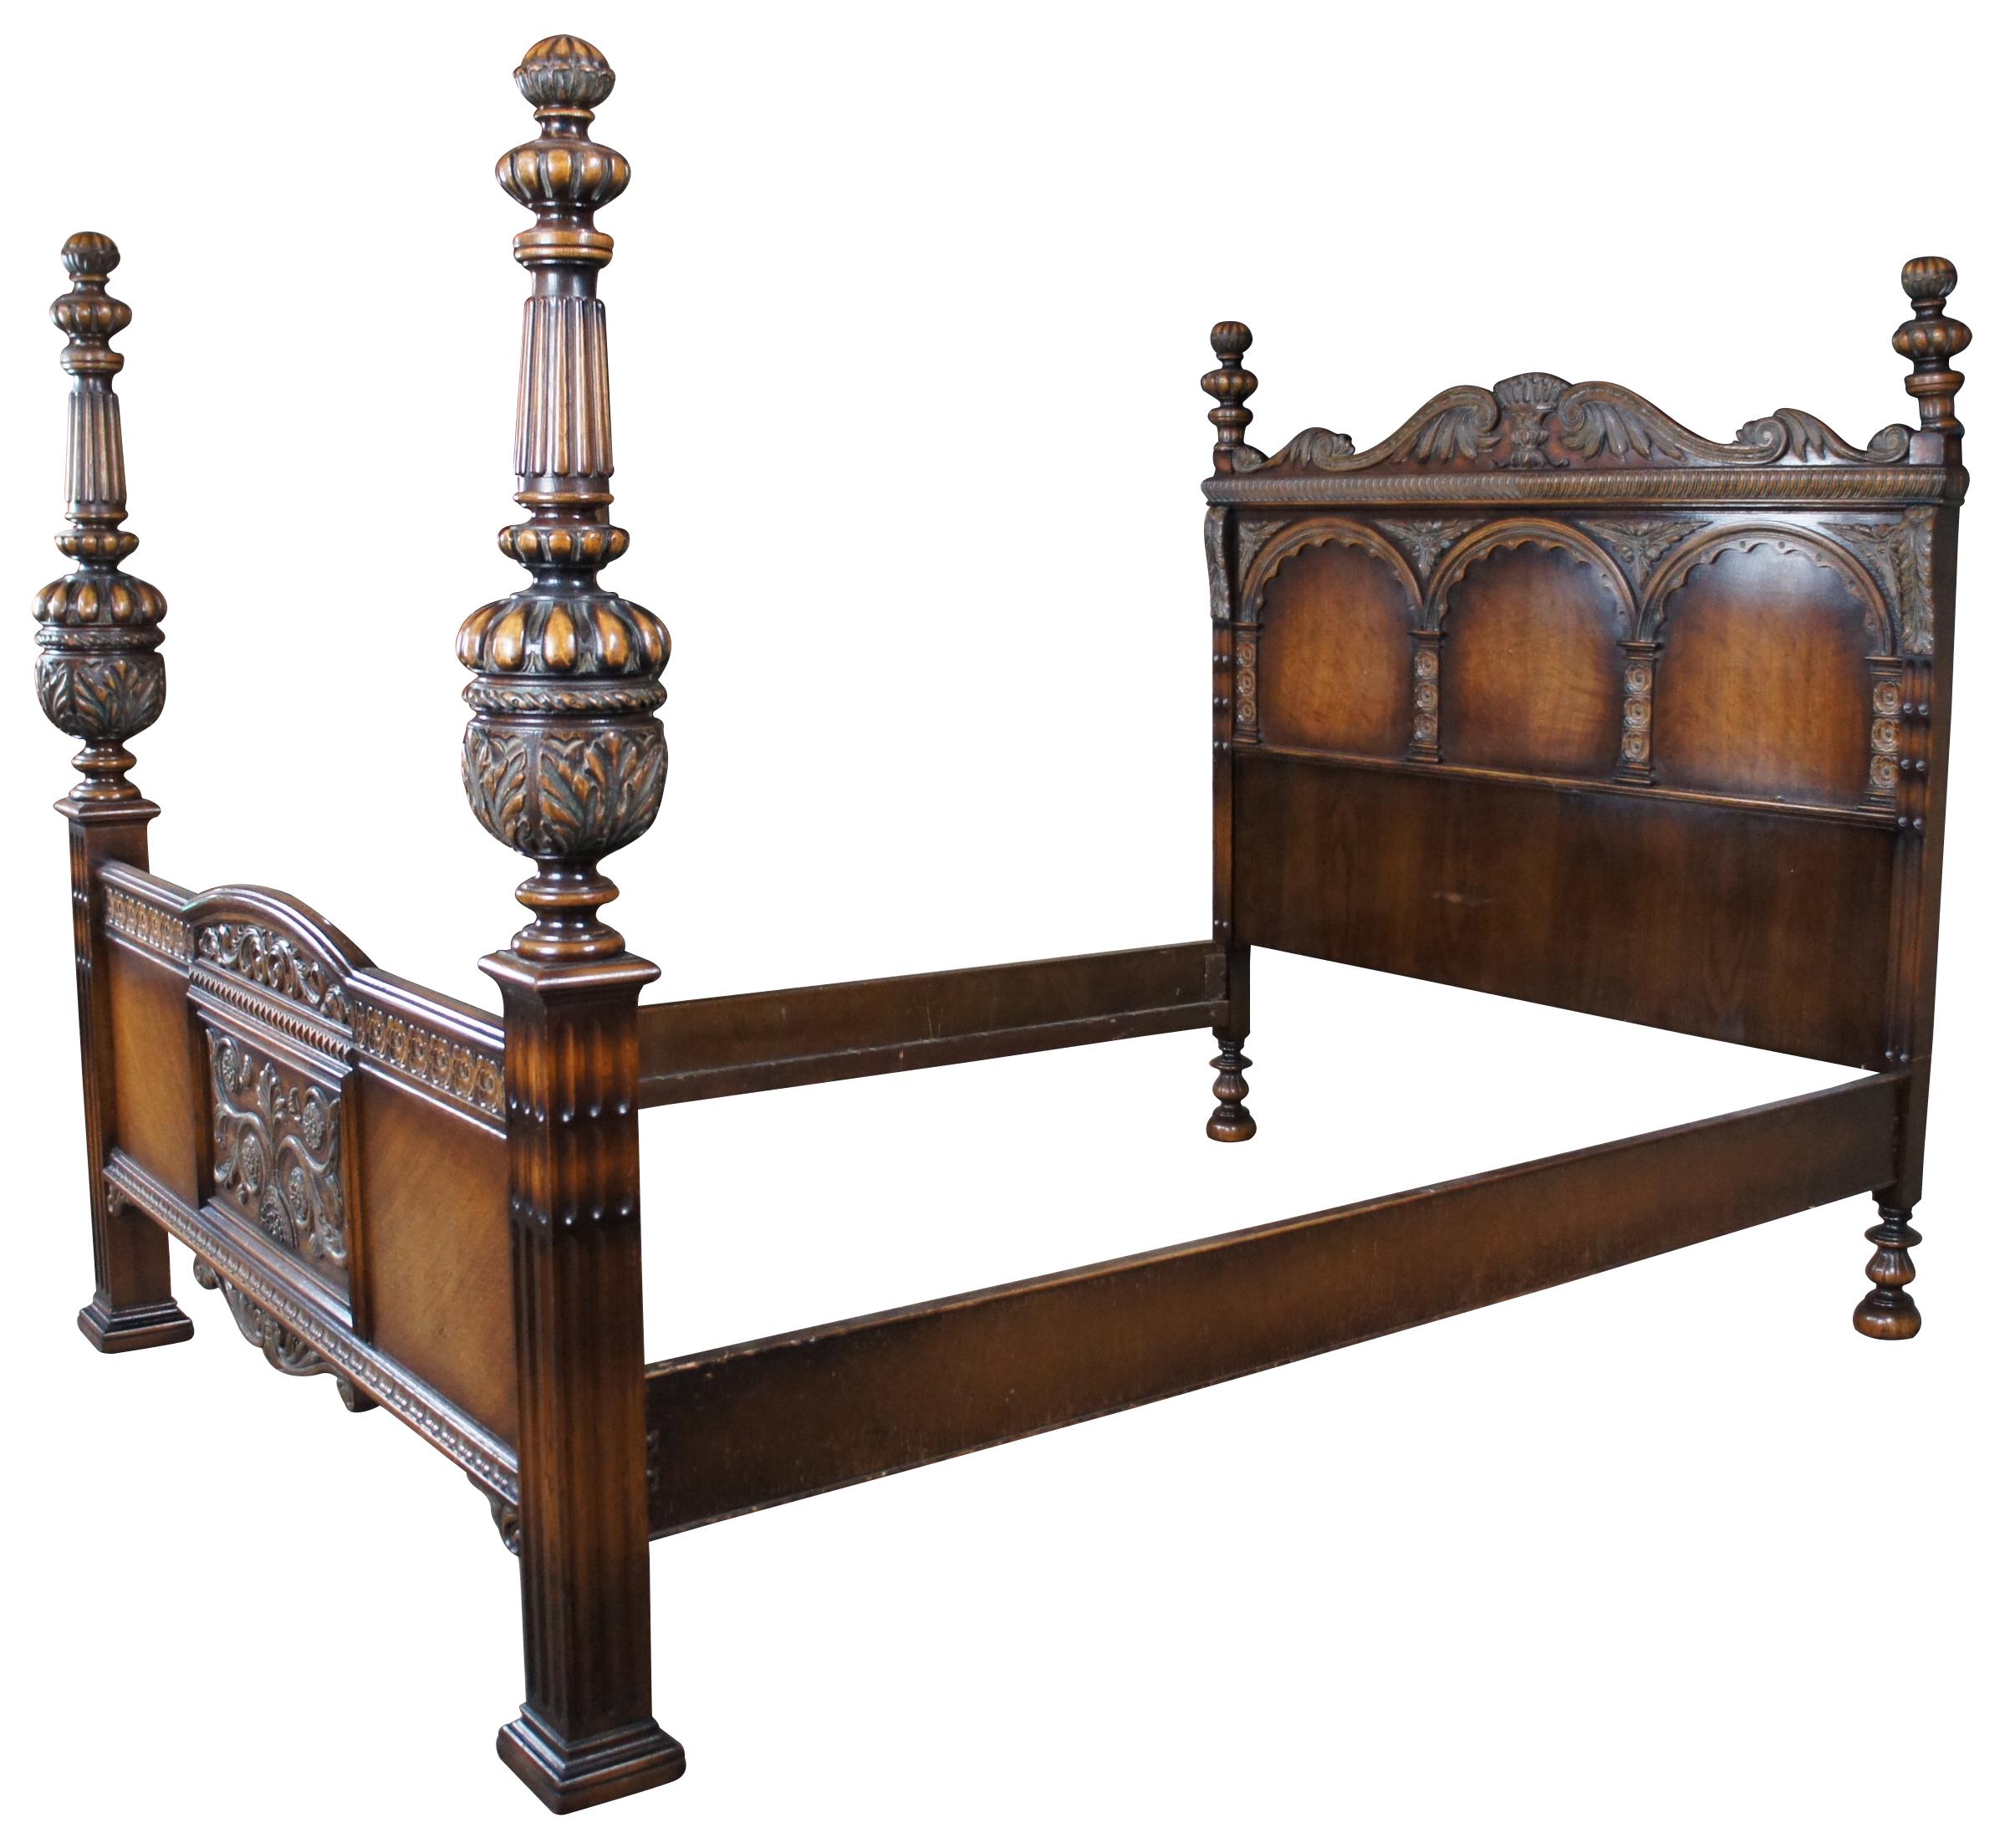 American Furniture Company Elizabethan or Jacobean Revival bed full size bed. Operating out of Batesville Indiana since 1899, they worked closely and collaborated in part with Romweber. Specializing in high grade bedroom suites and furniture. Made